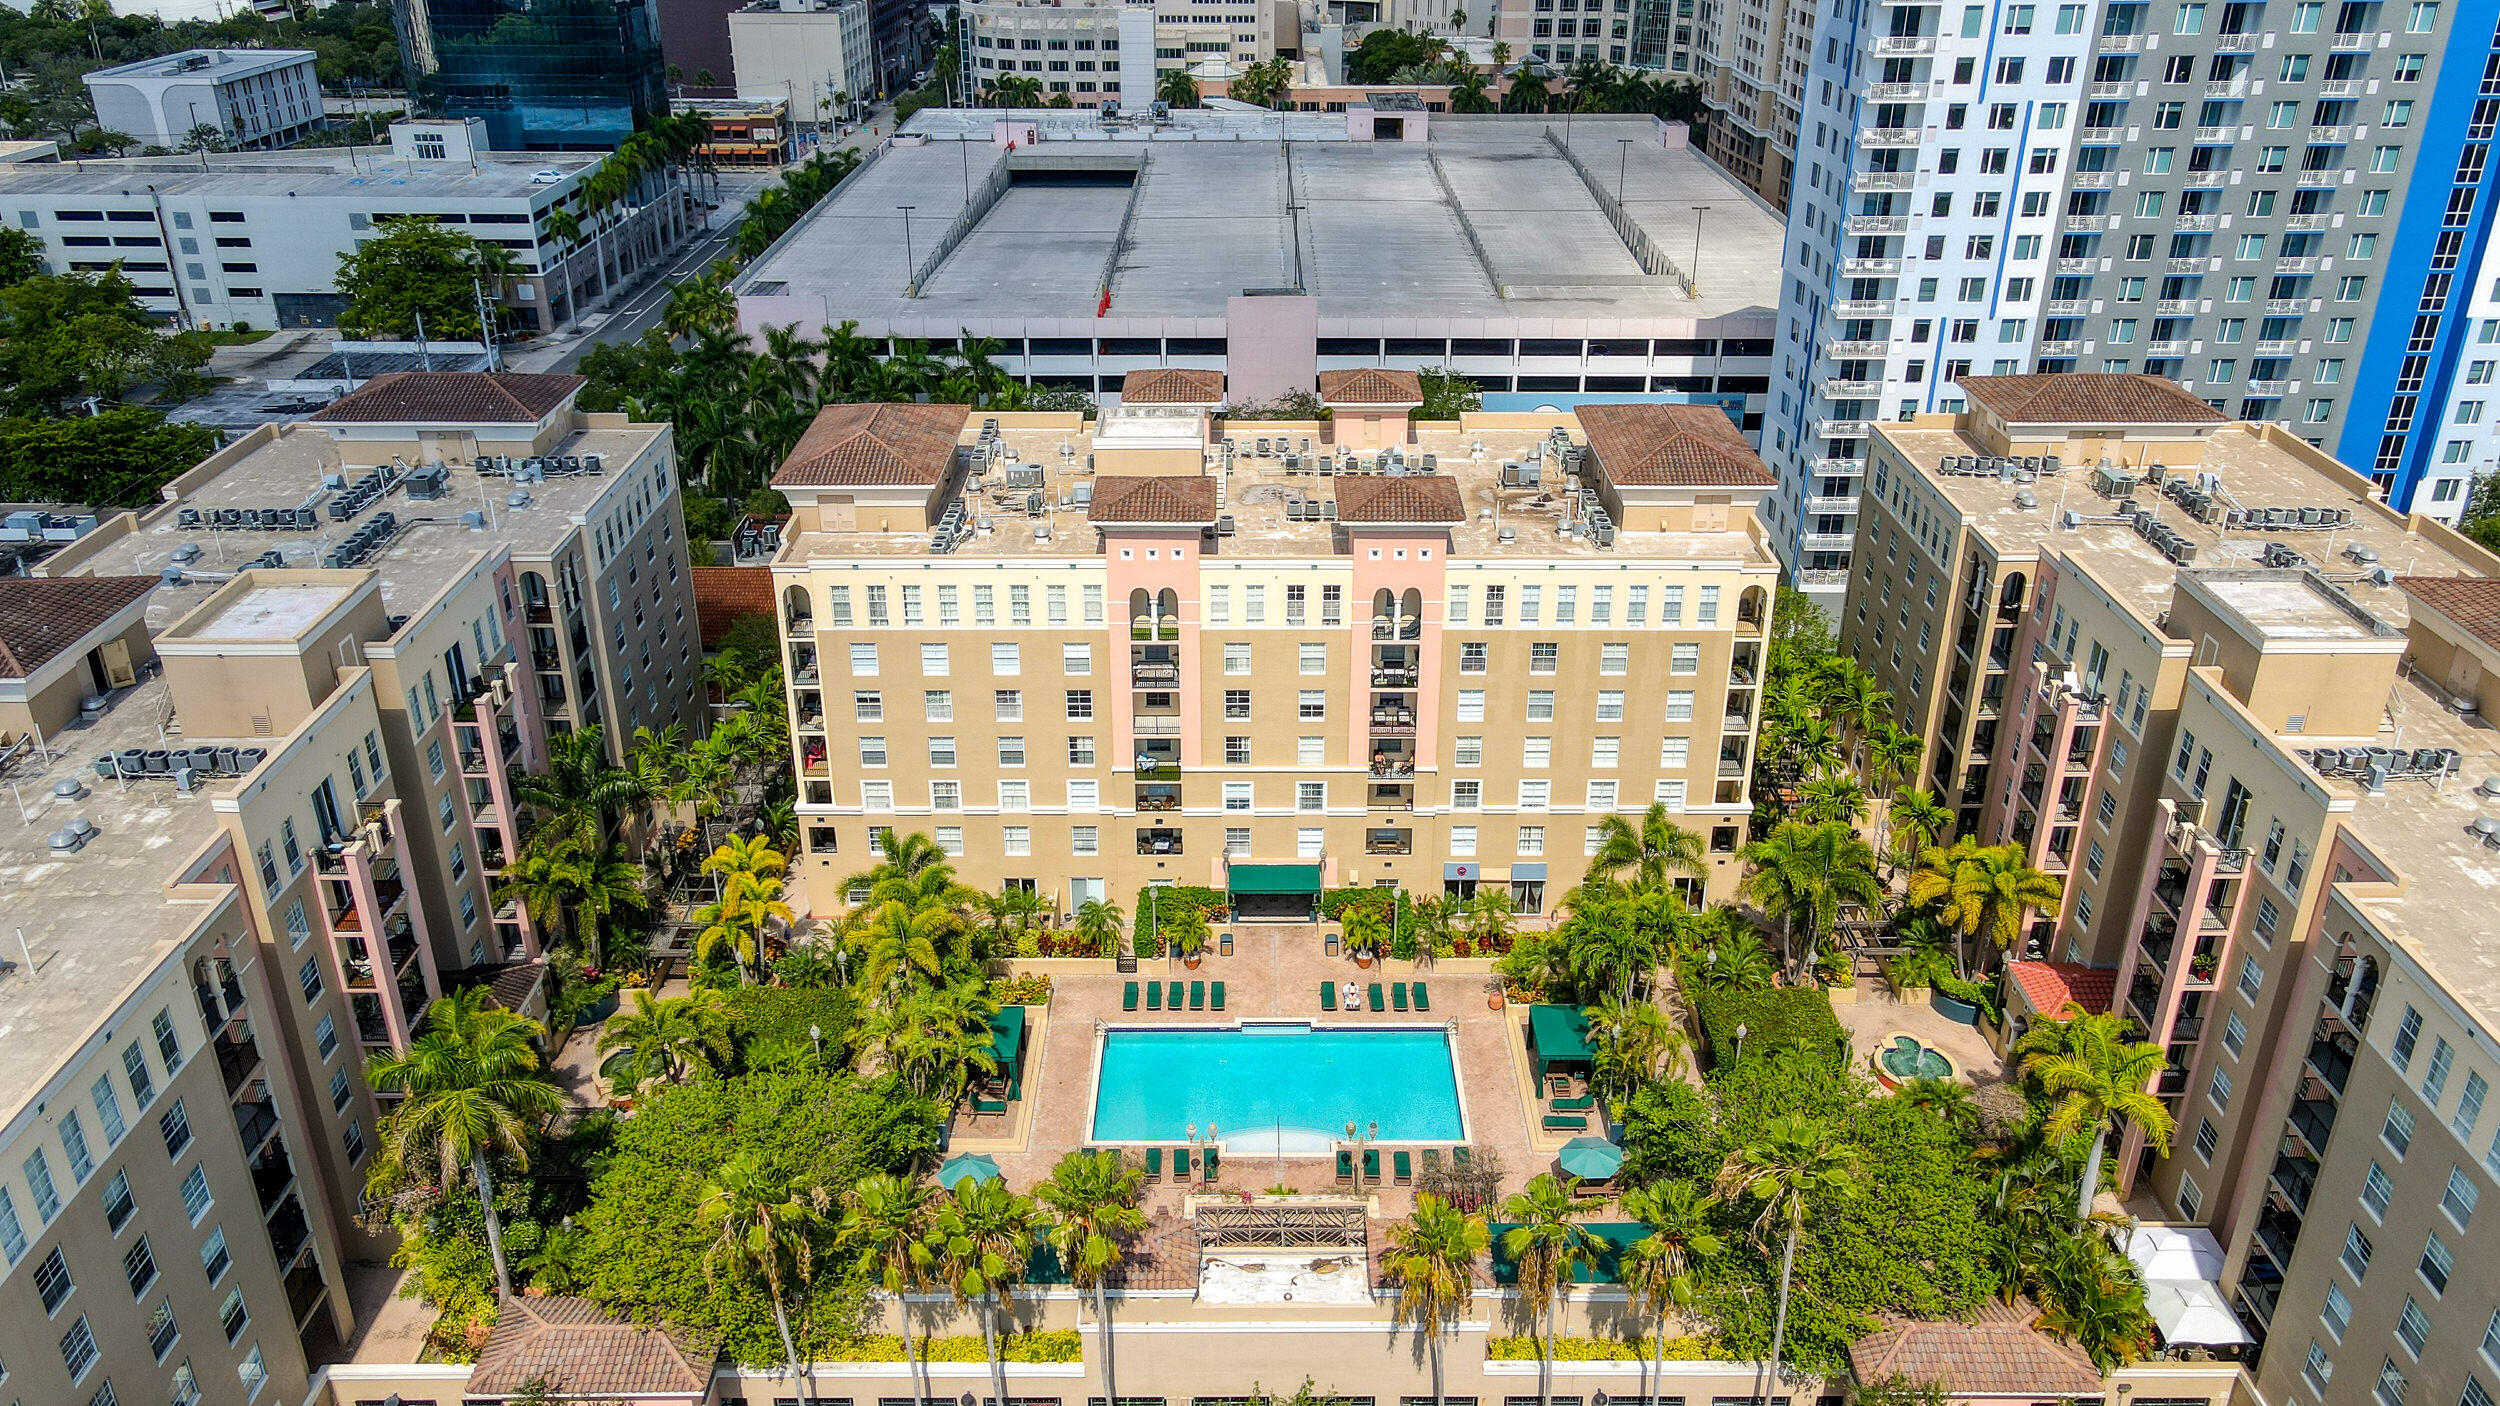 Newly updated 2/2, 5th floor unit w/ pool views available in Las Olas By The River. Step inside & notice the stunning tile floors, custom fixtures, & an abundance of natural light. Equipped w/ an upgraded kitchen, stainless steel appliances, granite counter tops & plenty of cabinets. The spacious master bedroom has a walk-in closet, an extra closet for more storage & your own private bathroom w dual sinks. Enjoy sweeping pool views from your huge balcony, accessible from the living room. W/D in unit & your assigned parking spot is in a prime location - right next to the elevator. Located in popular Downtown Ft Lauderdale, your new home comes w/ a doorman, amazing amenities, and is walking distance to downtown Riverwalk, E Las Olas Blvd, & a close drive to I95 & the beach! COME SEE TODAY!